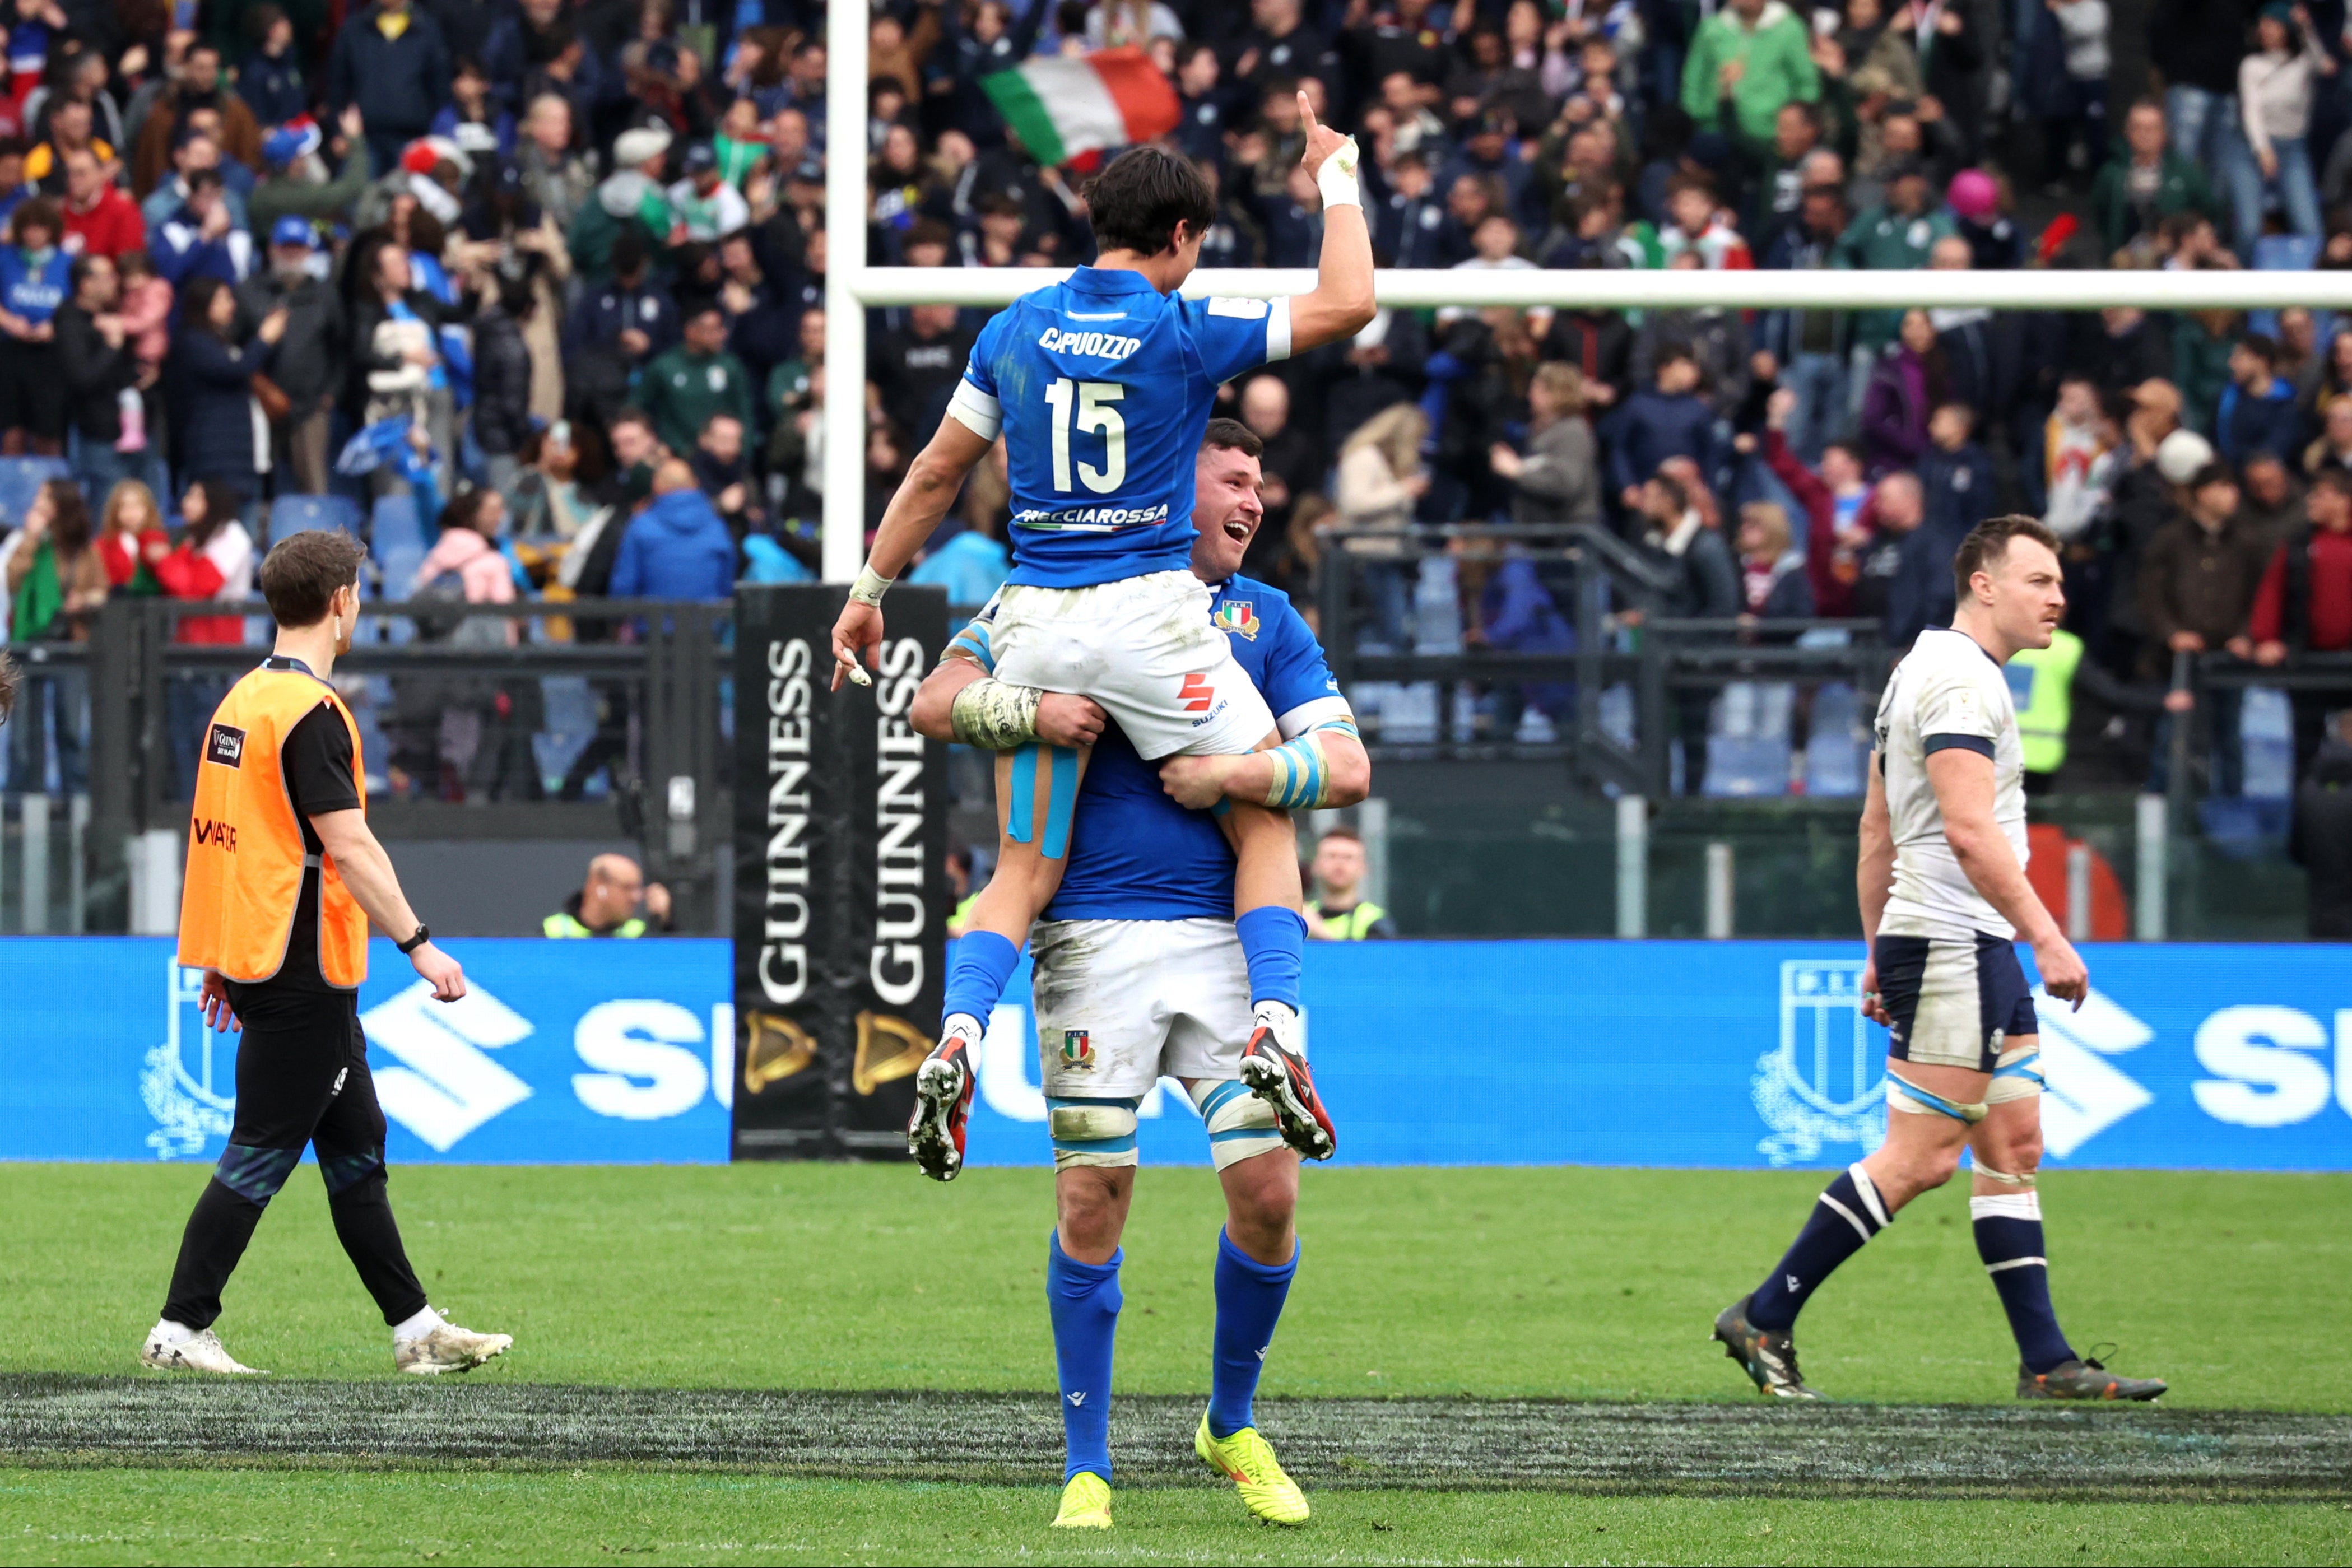 Italy celebrated a first win over Scotland since 2015 and a first in Rome since 2012